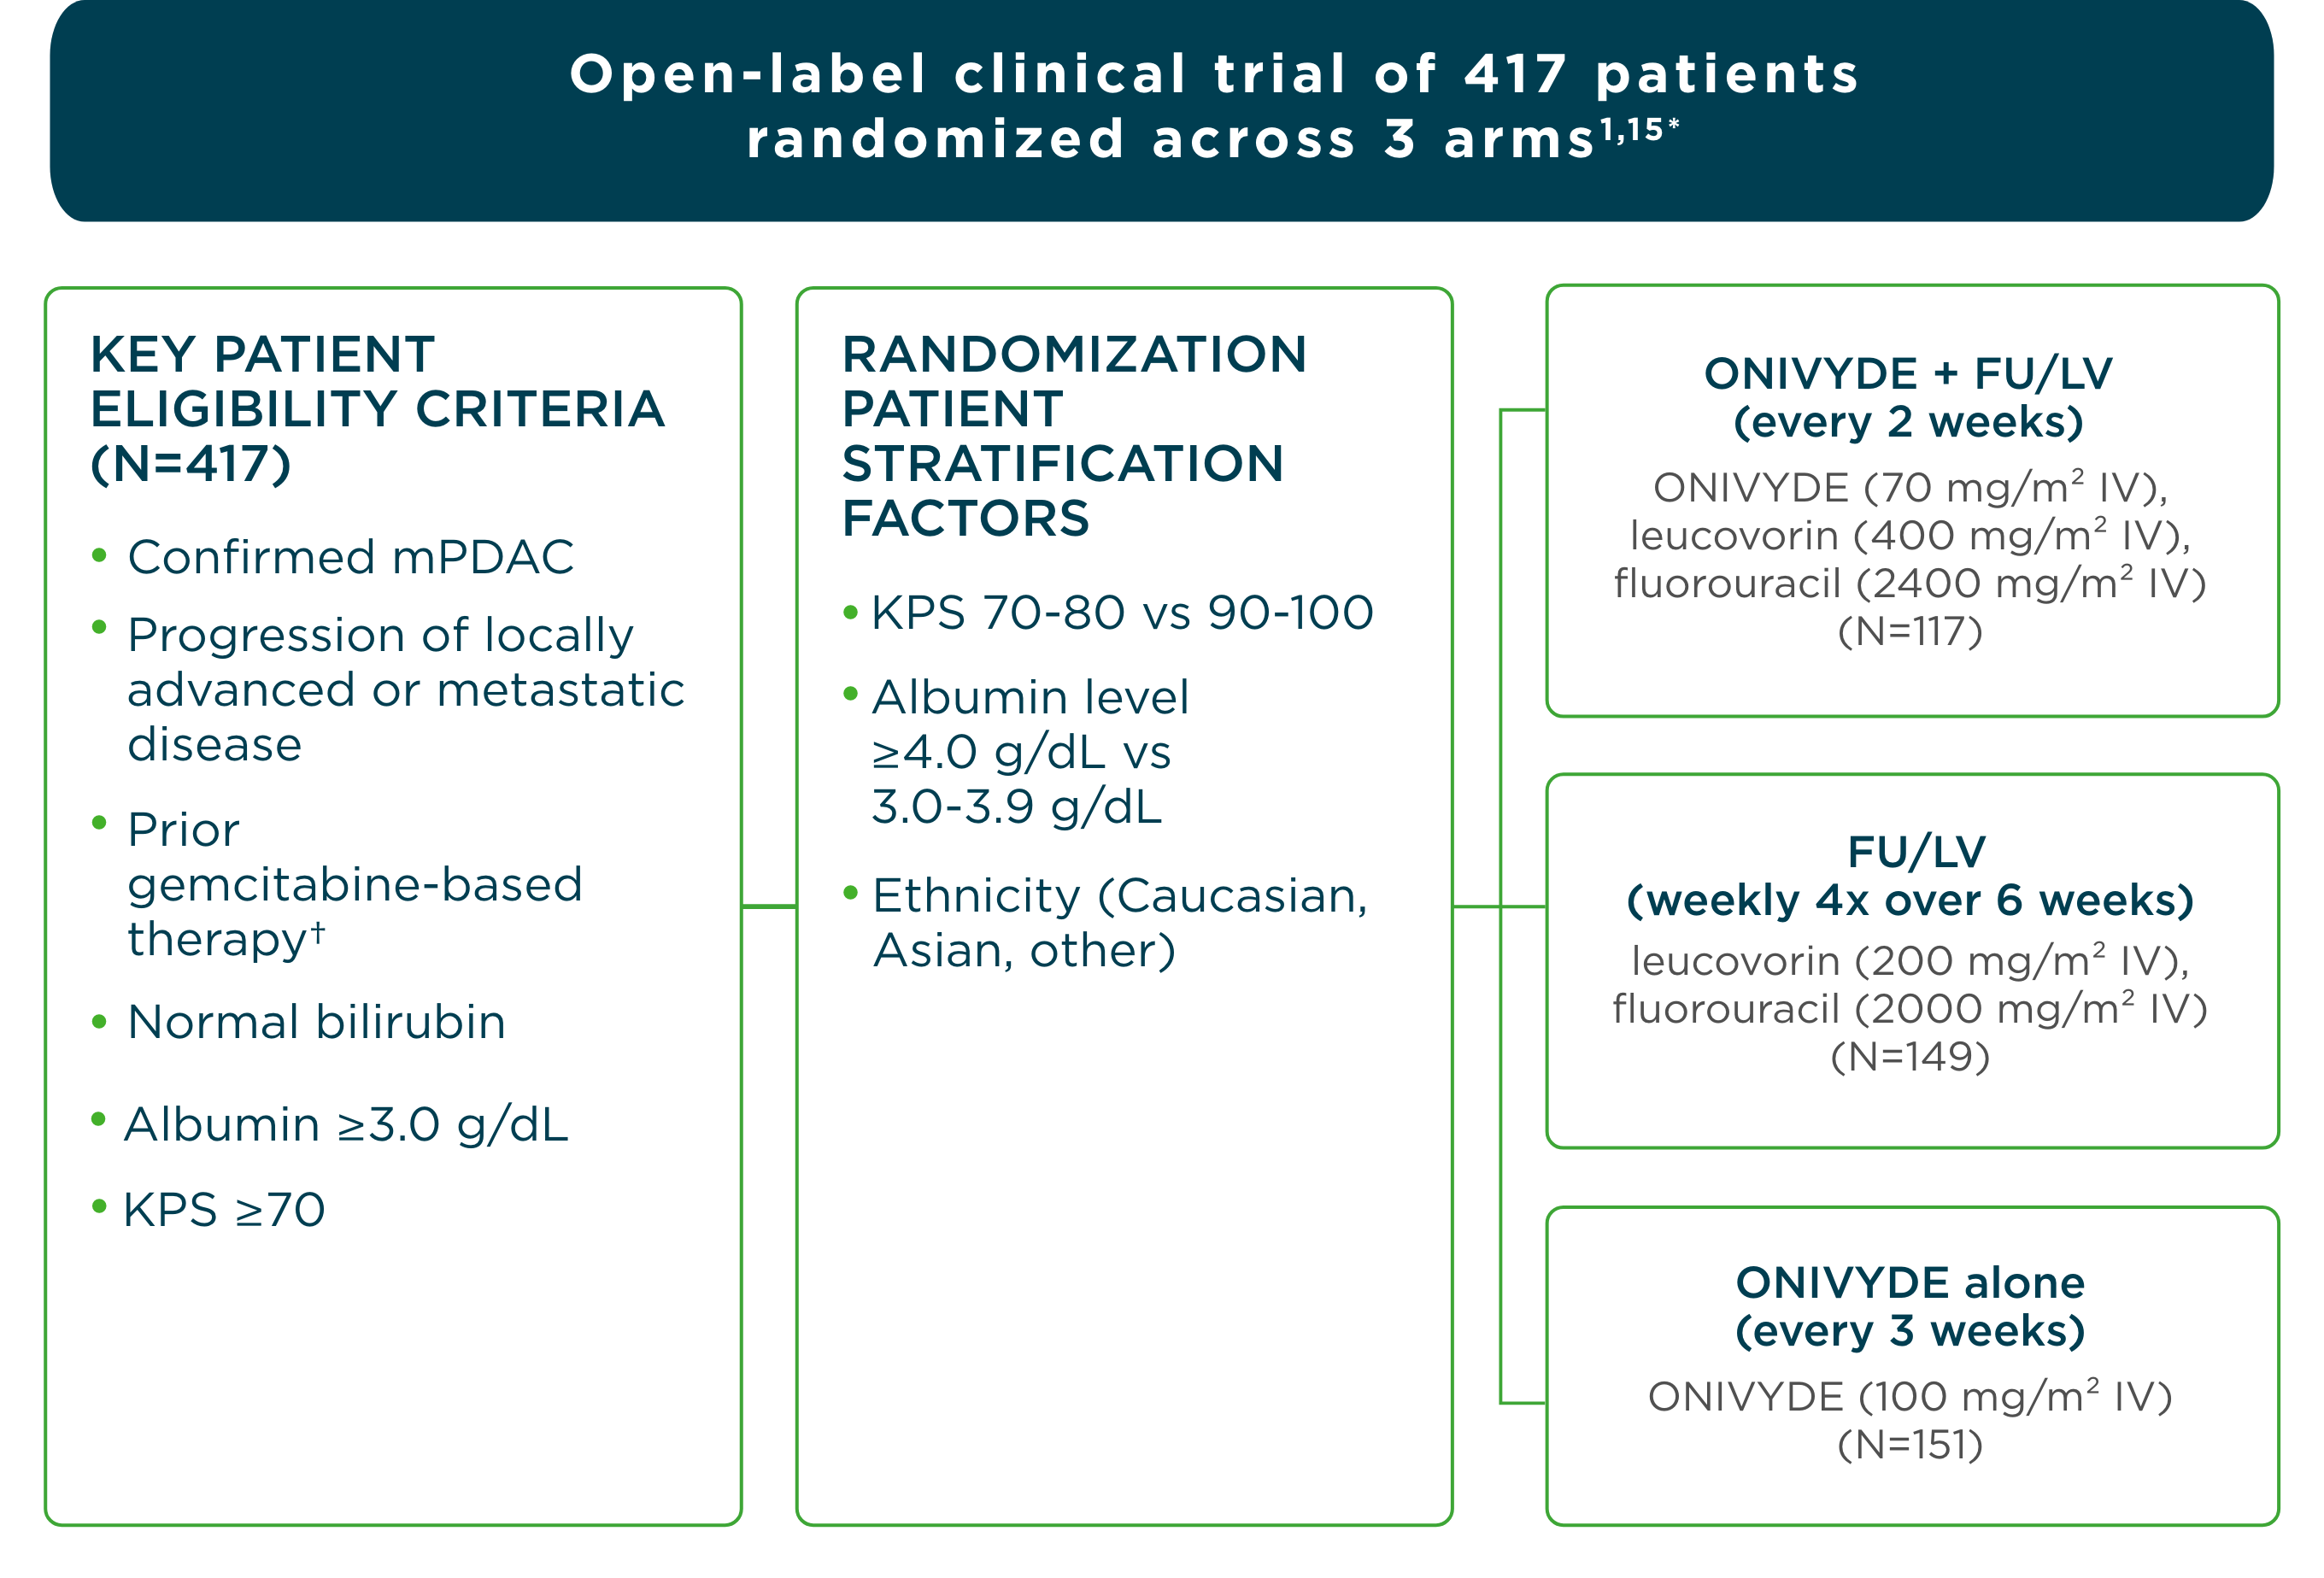 NAPOLI-1 study design: a large, phase 3, open-label clinical trial of patients randomized across 3 arms: ONIVYDE® (irinotecan liposome injection) + FU/LV, FU/LV alone, and ONIVYDE® (irinotecan liposome injection) alone.